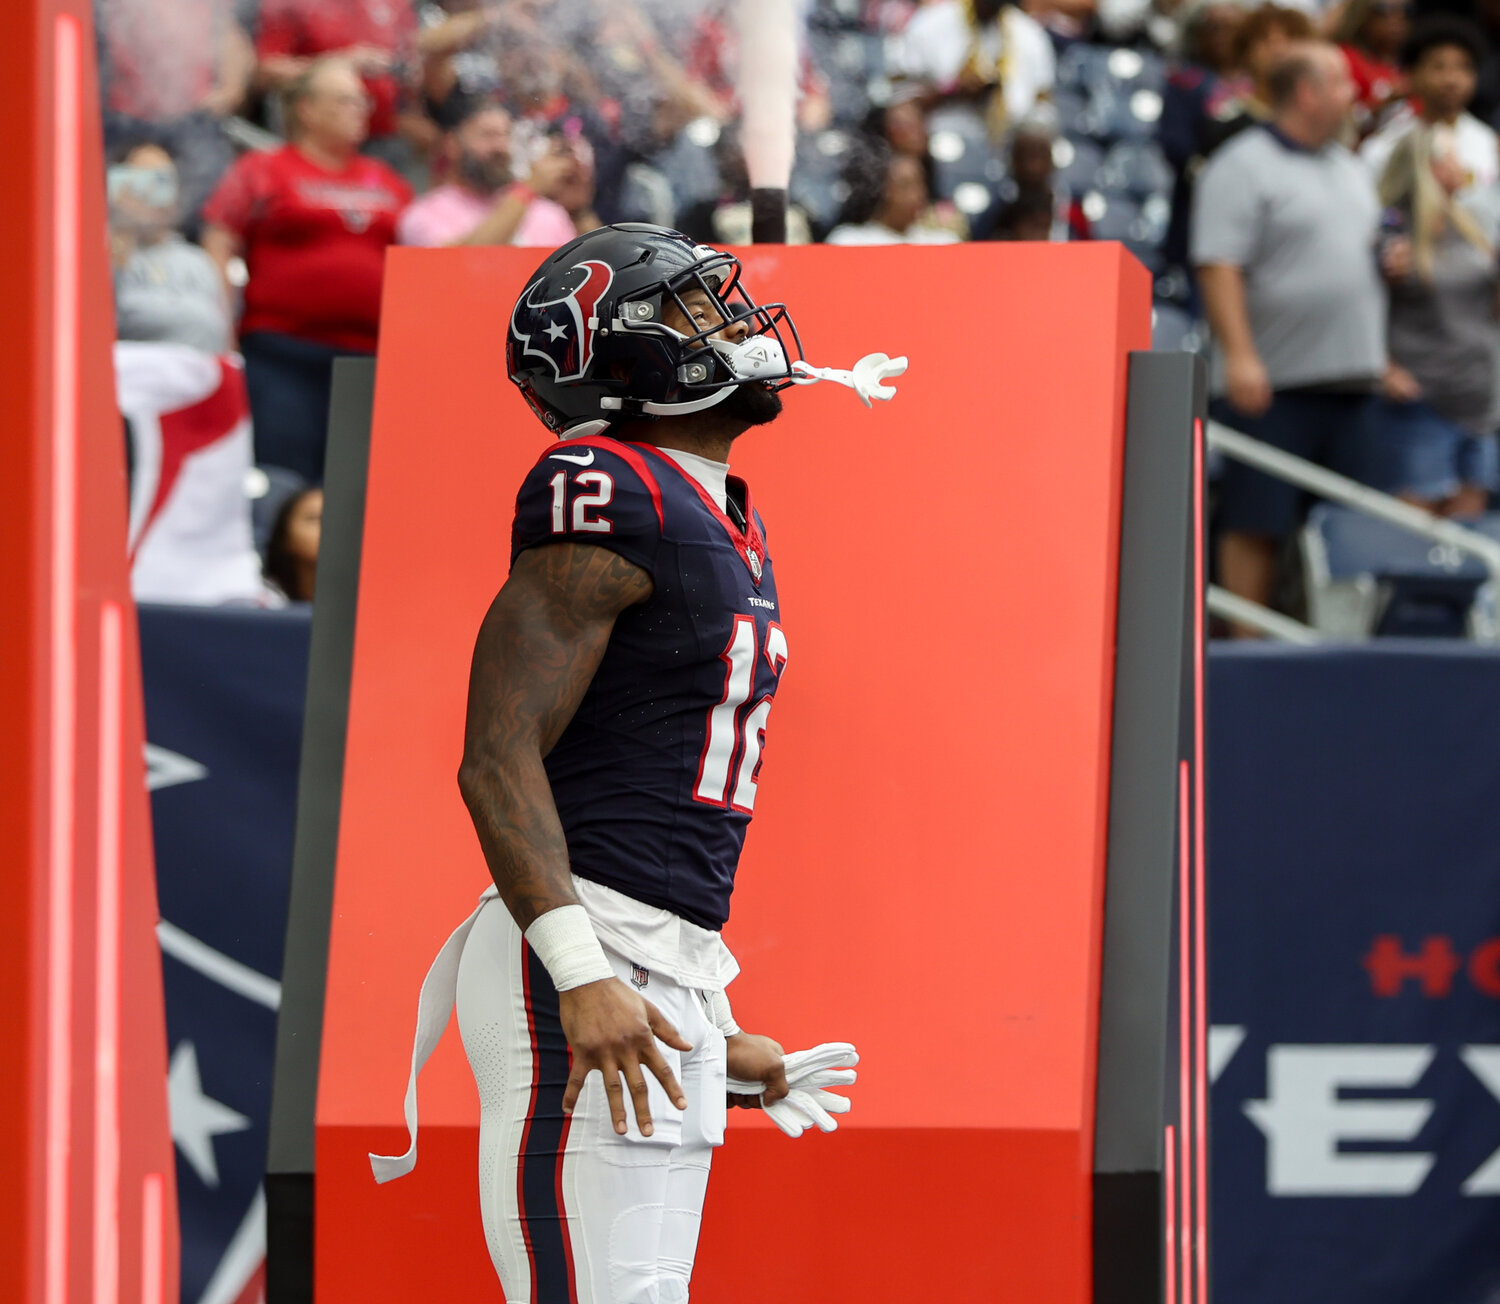 Texans wide receiver Nico Collins (12) takes the field for an NFL game between the Texans and the Saints on October 15, 2023 in Houston. The Texans won, 20-13.